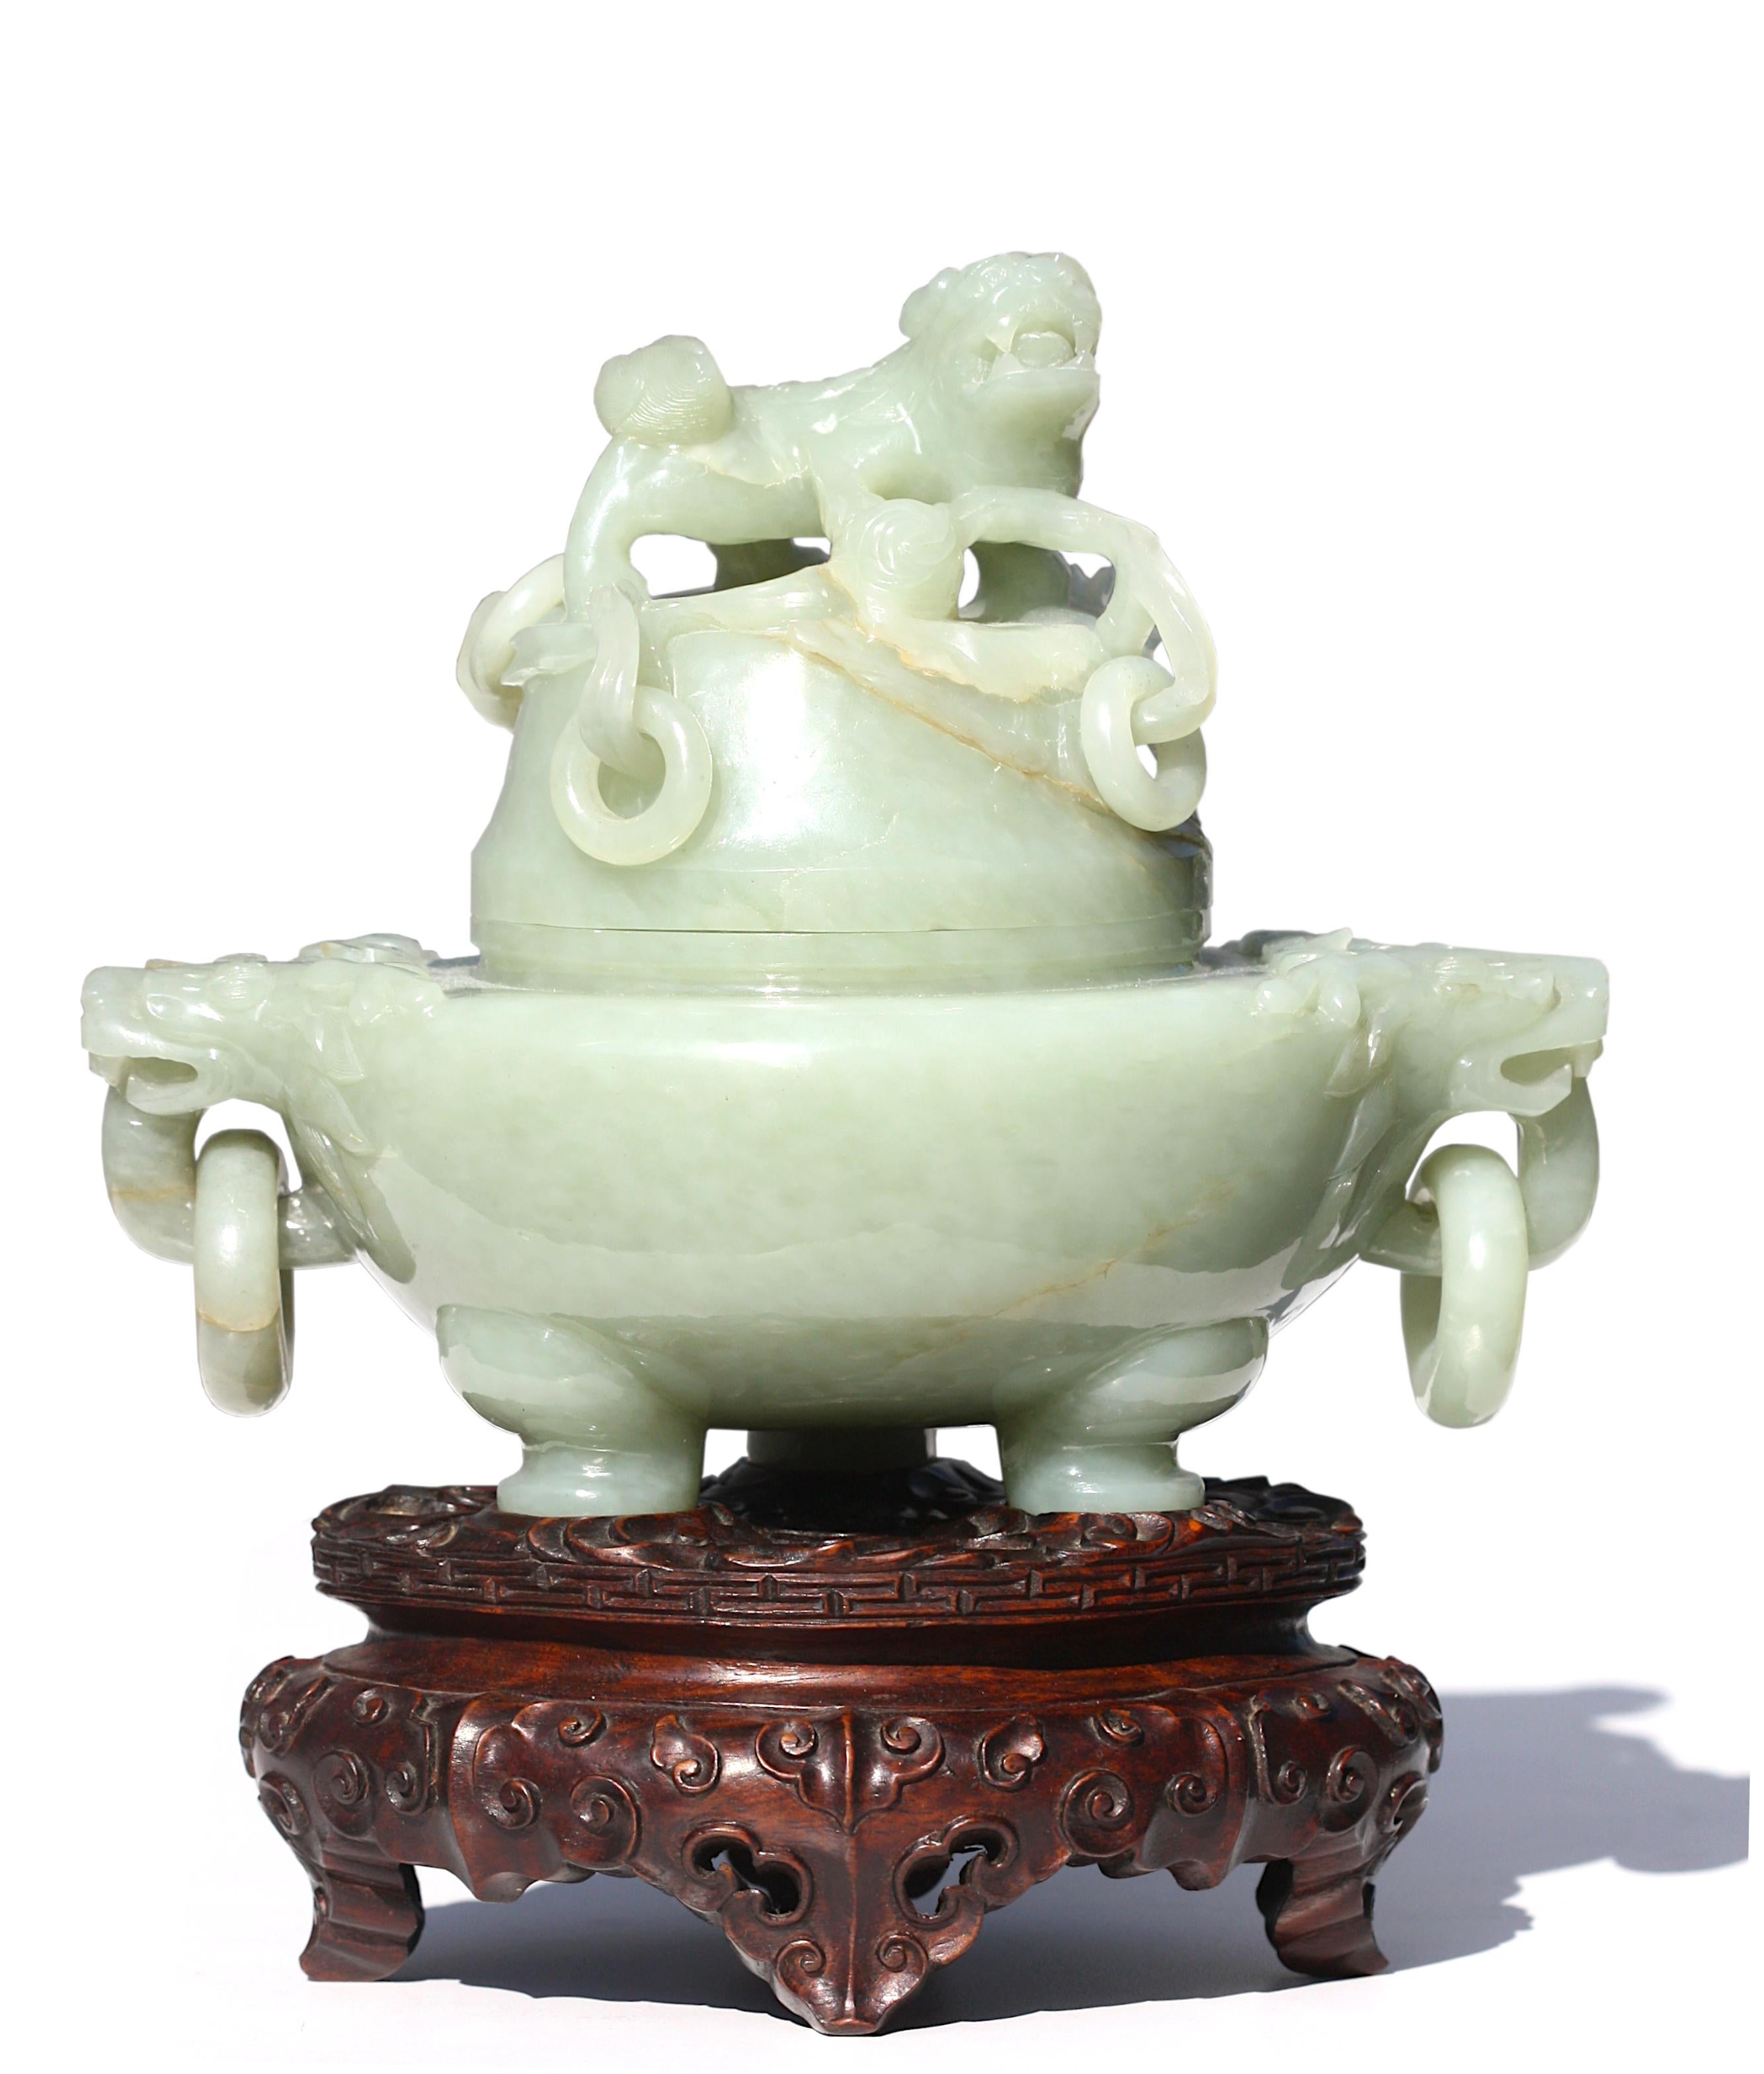 Fine Chinese Celadon Jade Tripod Censer
Qing Dynasty
The compressed body with a raised rim and flanked by a pair of reticulated mythical-beast handles suspending loose rings, on tripod stylized paw feet, the cylindrical cover with reticulated faux